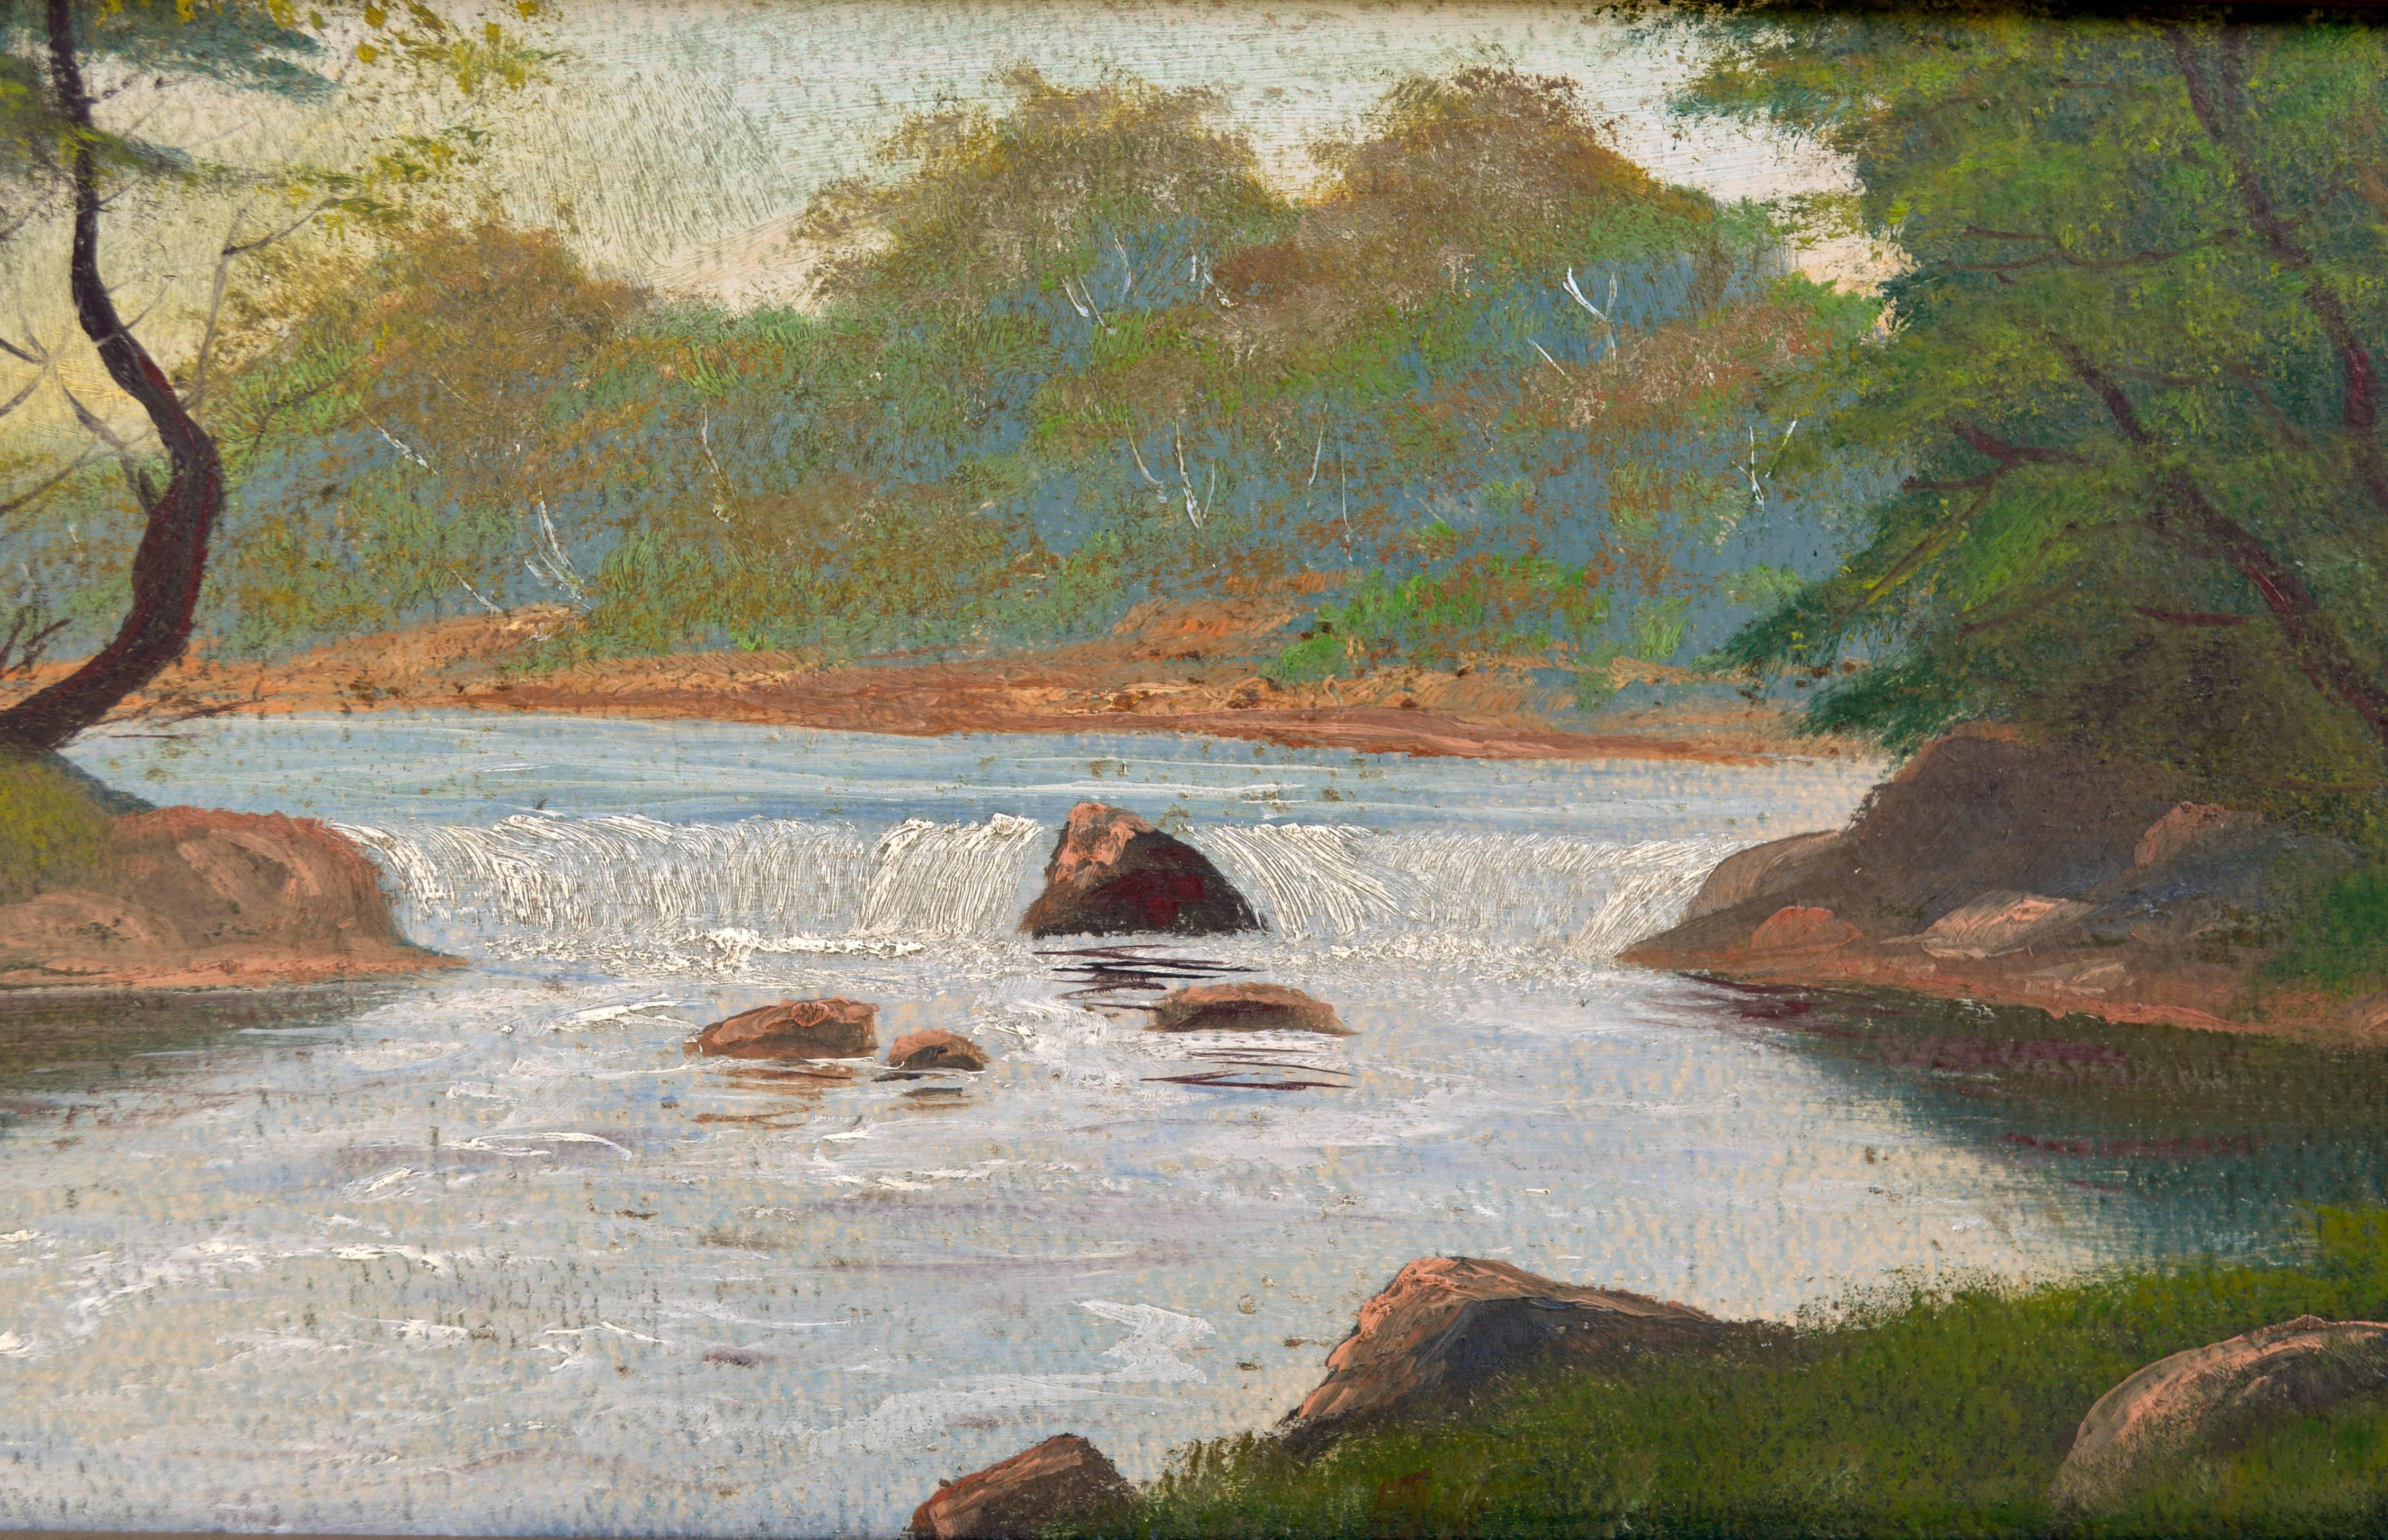 Early 20th Century California Stream - Painting by Thor Christian Nielsen